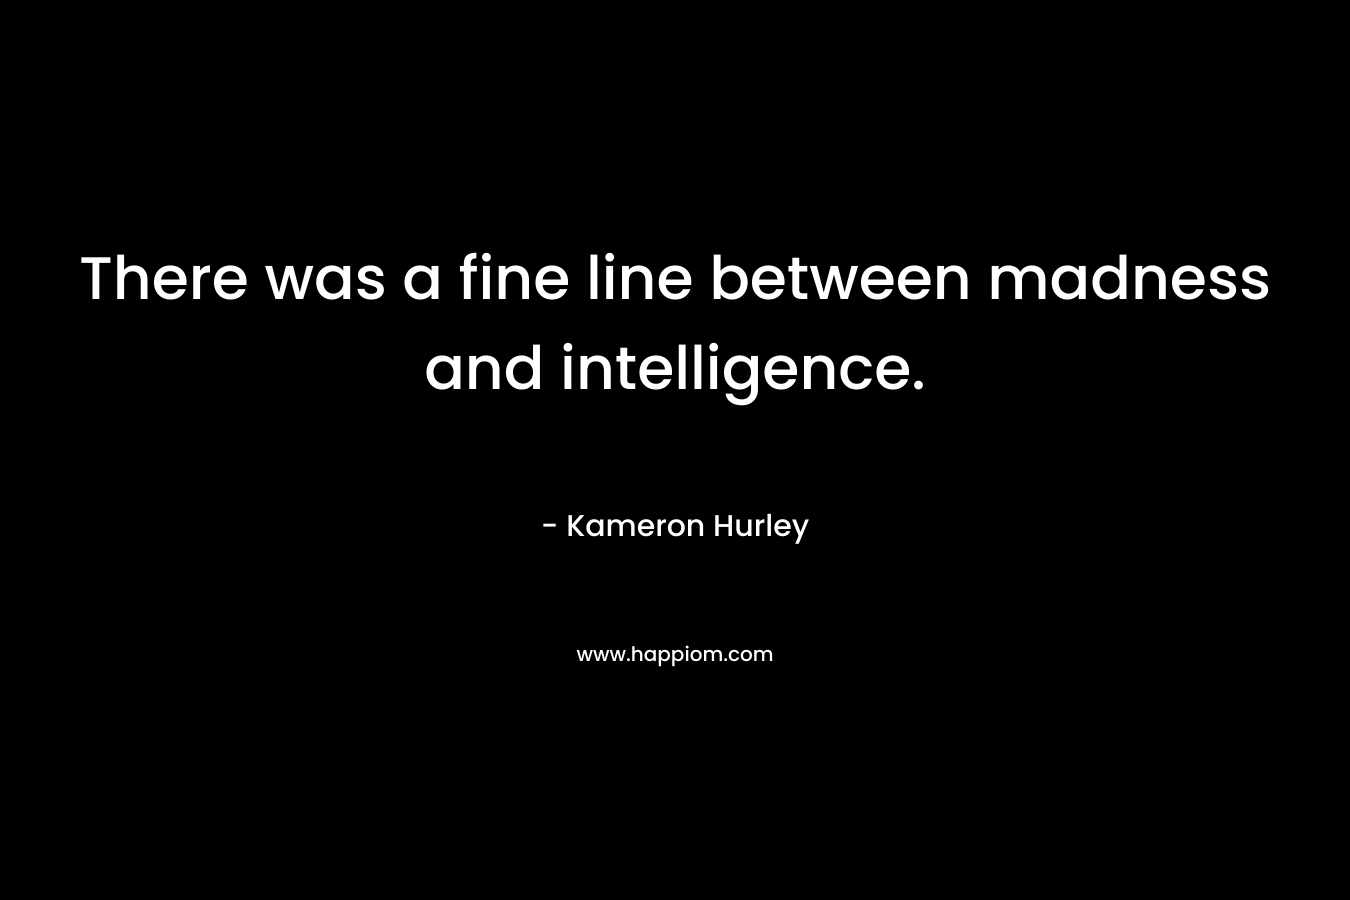 There was a fine line between madness and intelligence. – Kameron Hurley